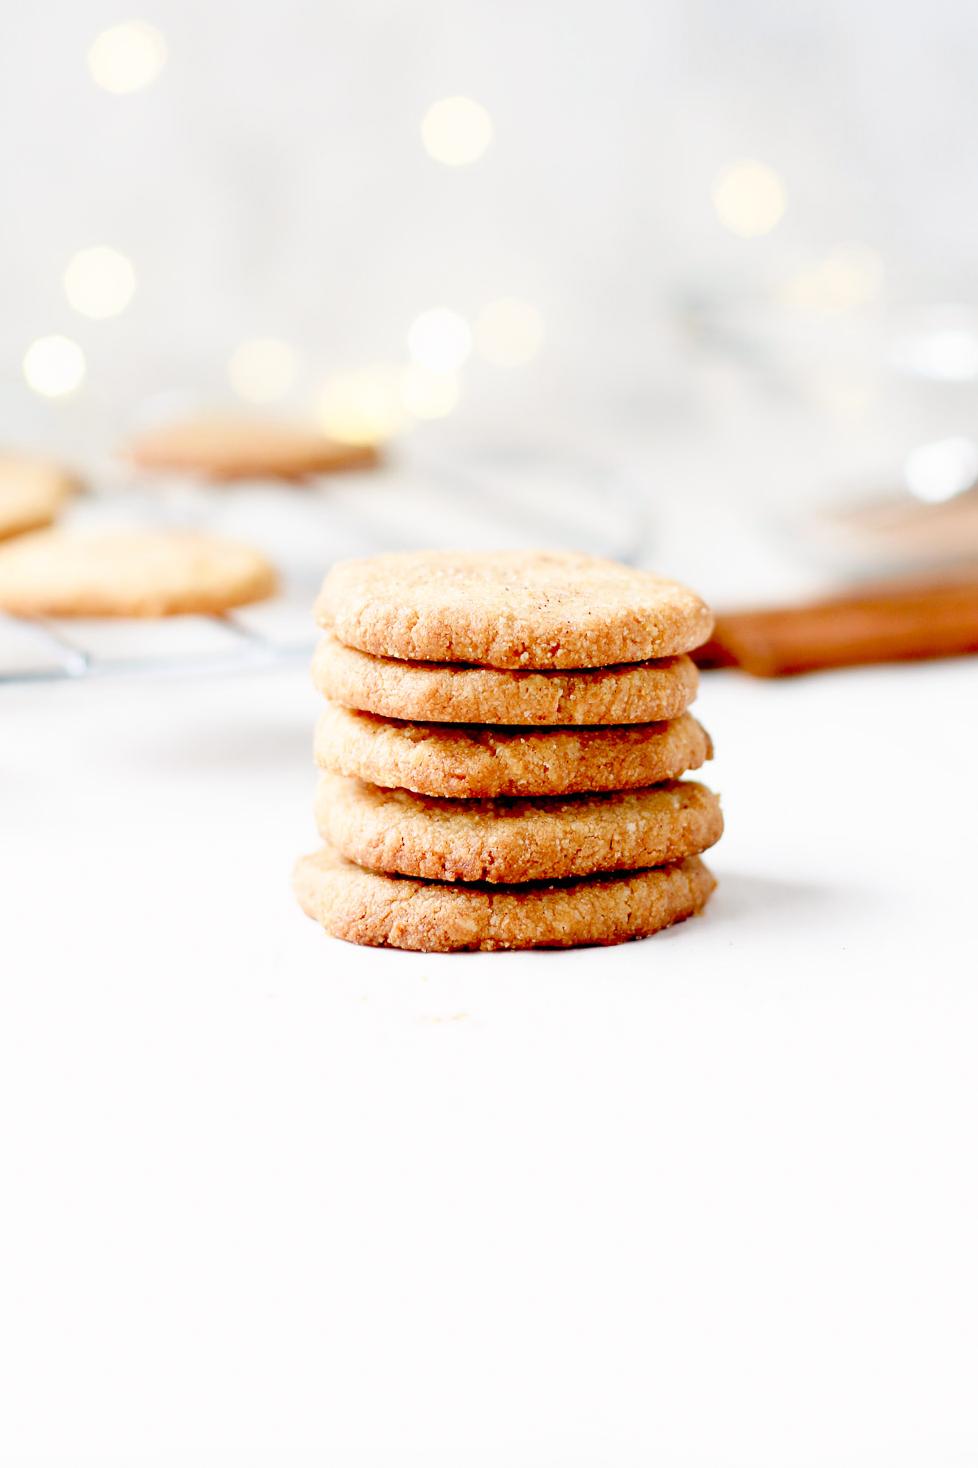  Get ready to fall in love with these gluten-free shortbread cookies.